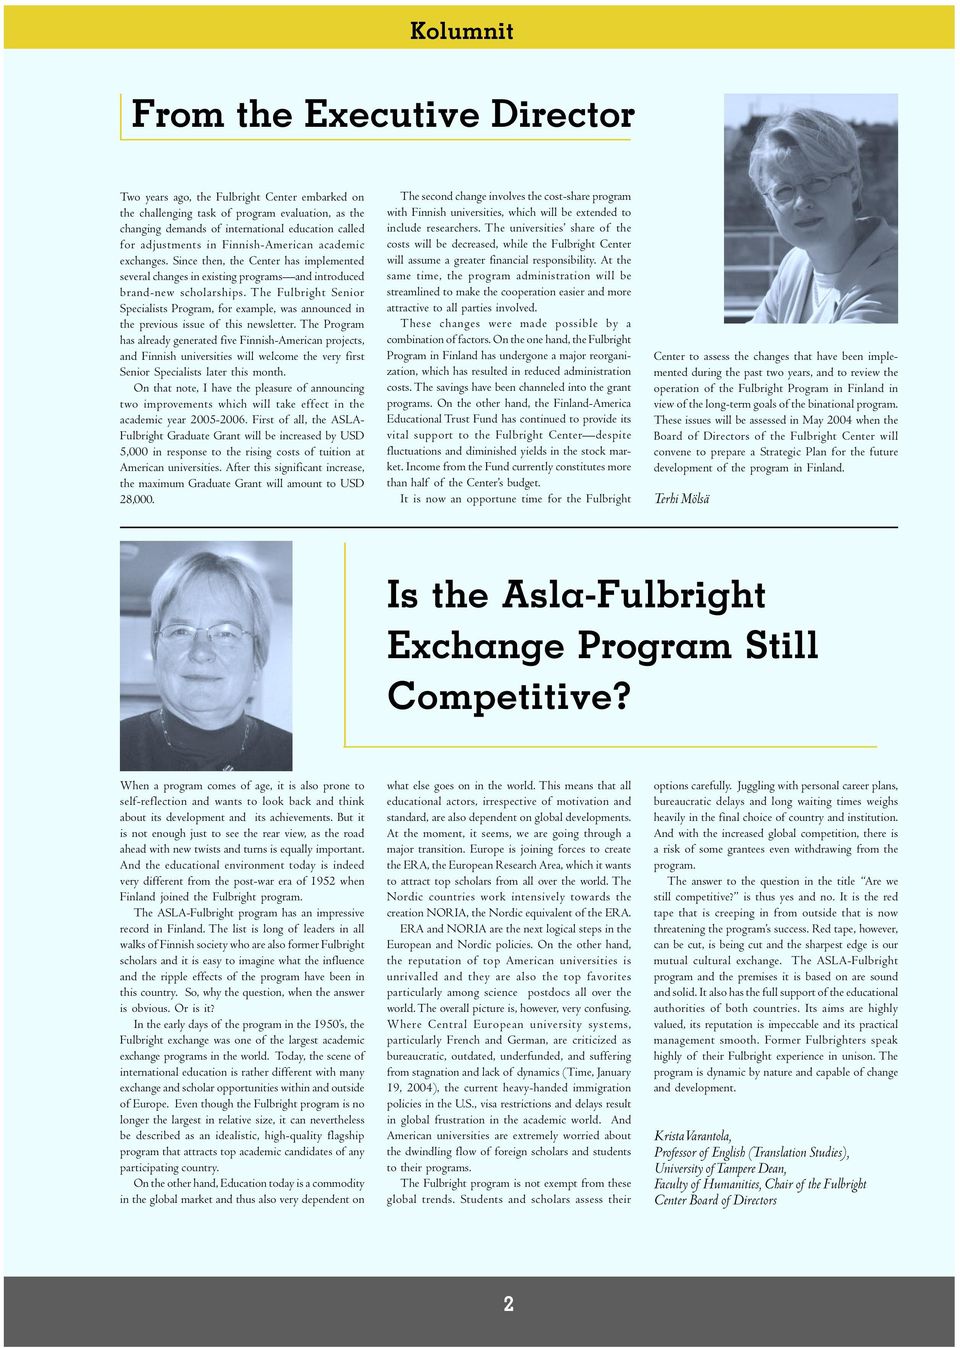 The Fulbright Senior Specialists Program, for example, was announced in the previous issue of this newsletter.